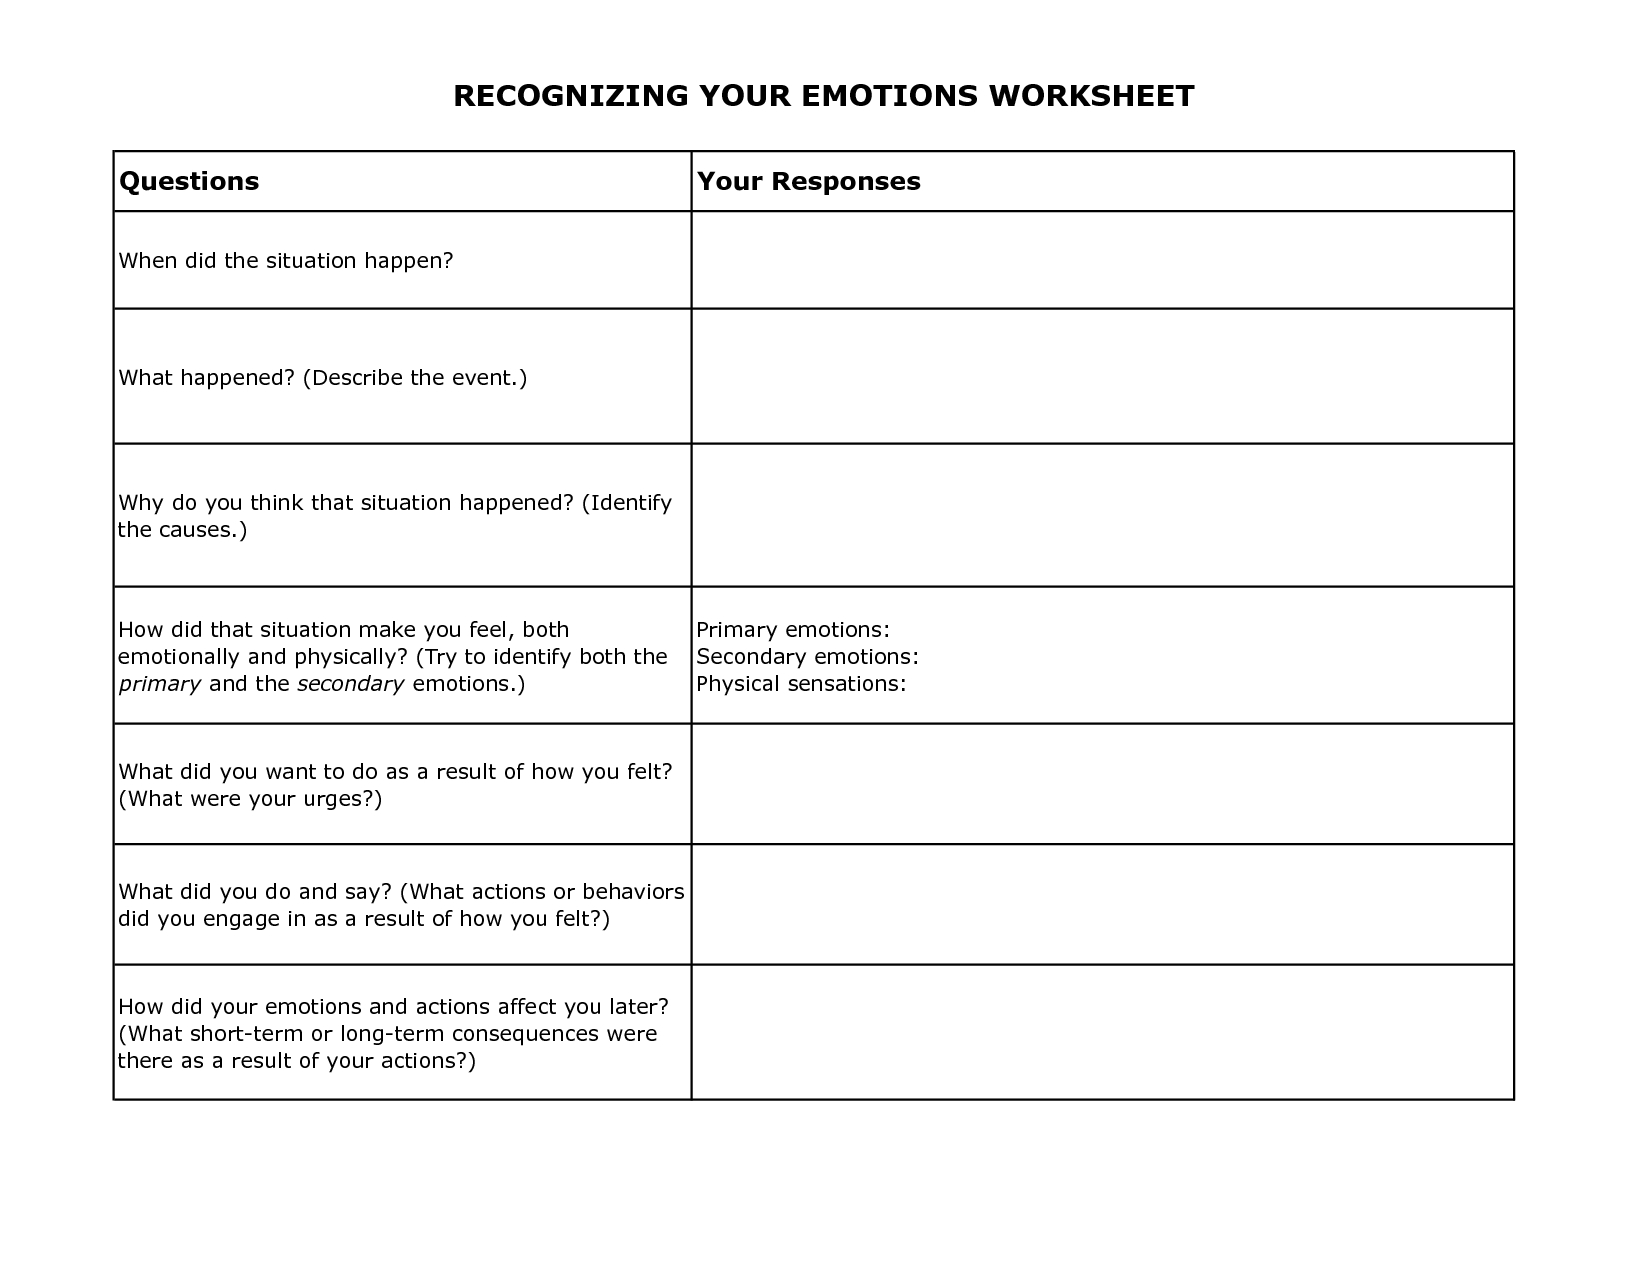 Free Printable Dbt Worksheets | Recognizing Your Emotions Worksheet - Free Printable Worksheets On Depression